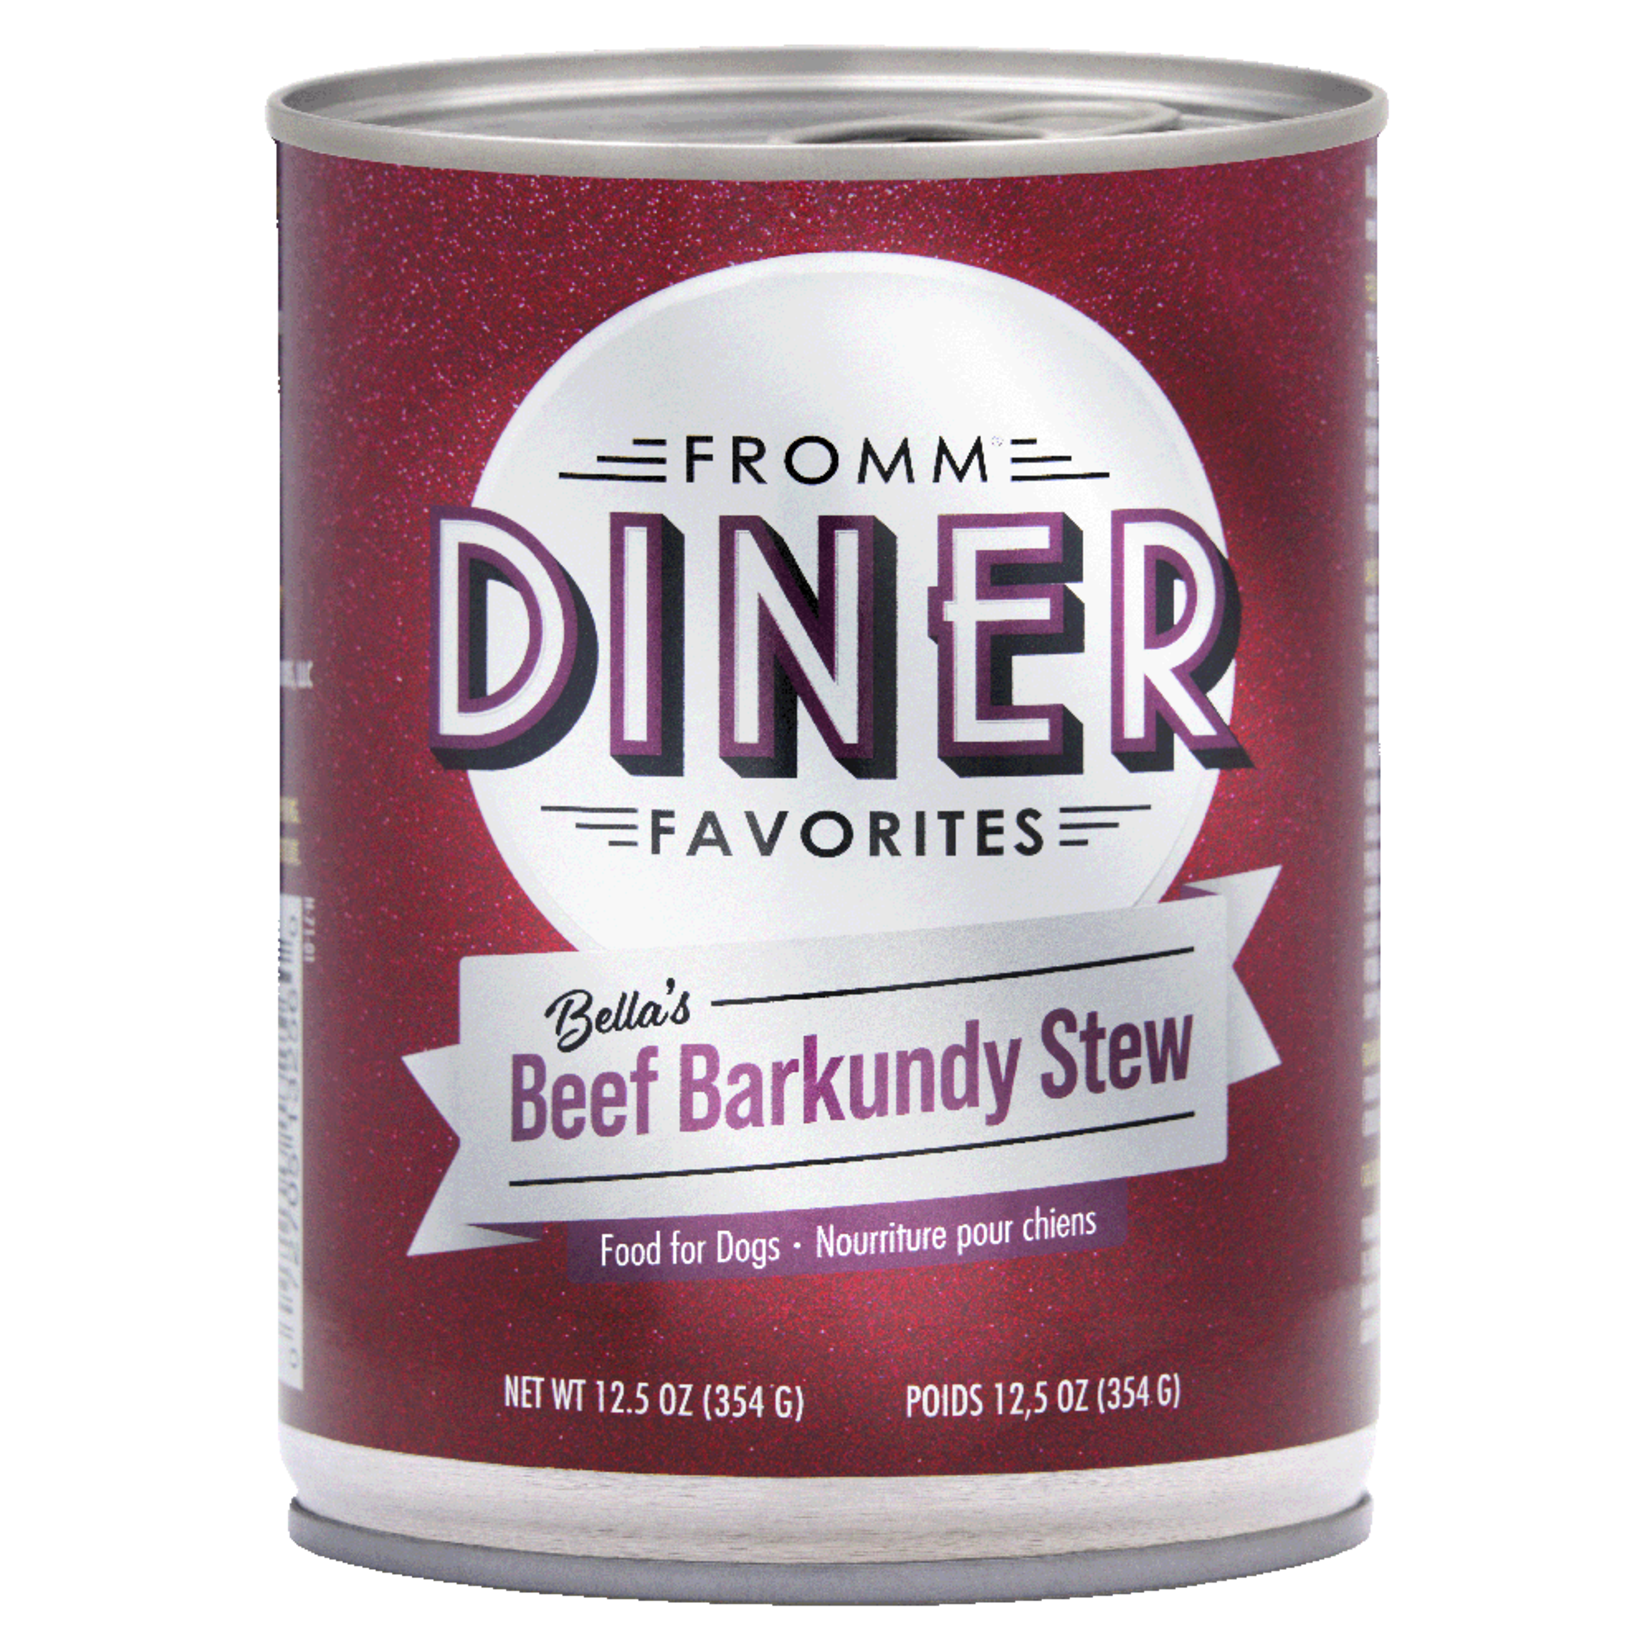 Fromm Fromm Beef Barkundy Stew Diner Favorites 12.5oz